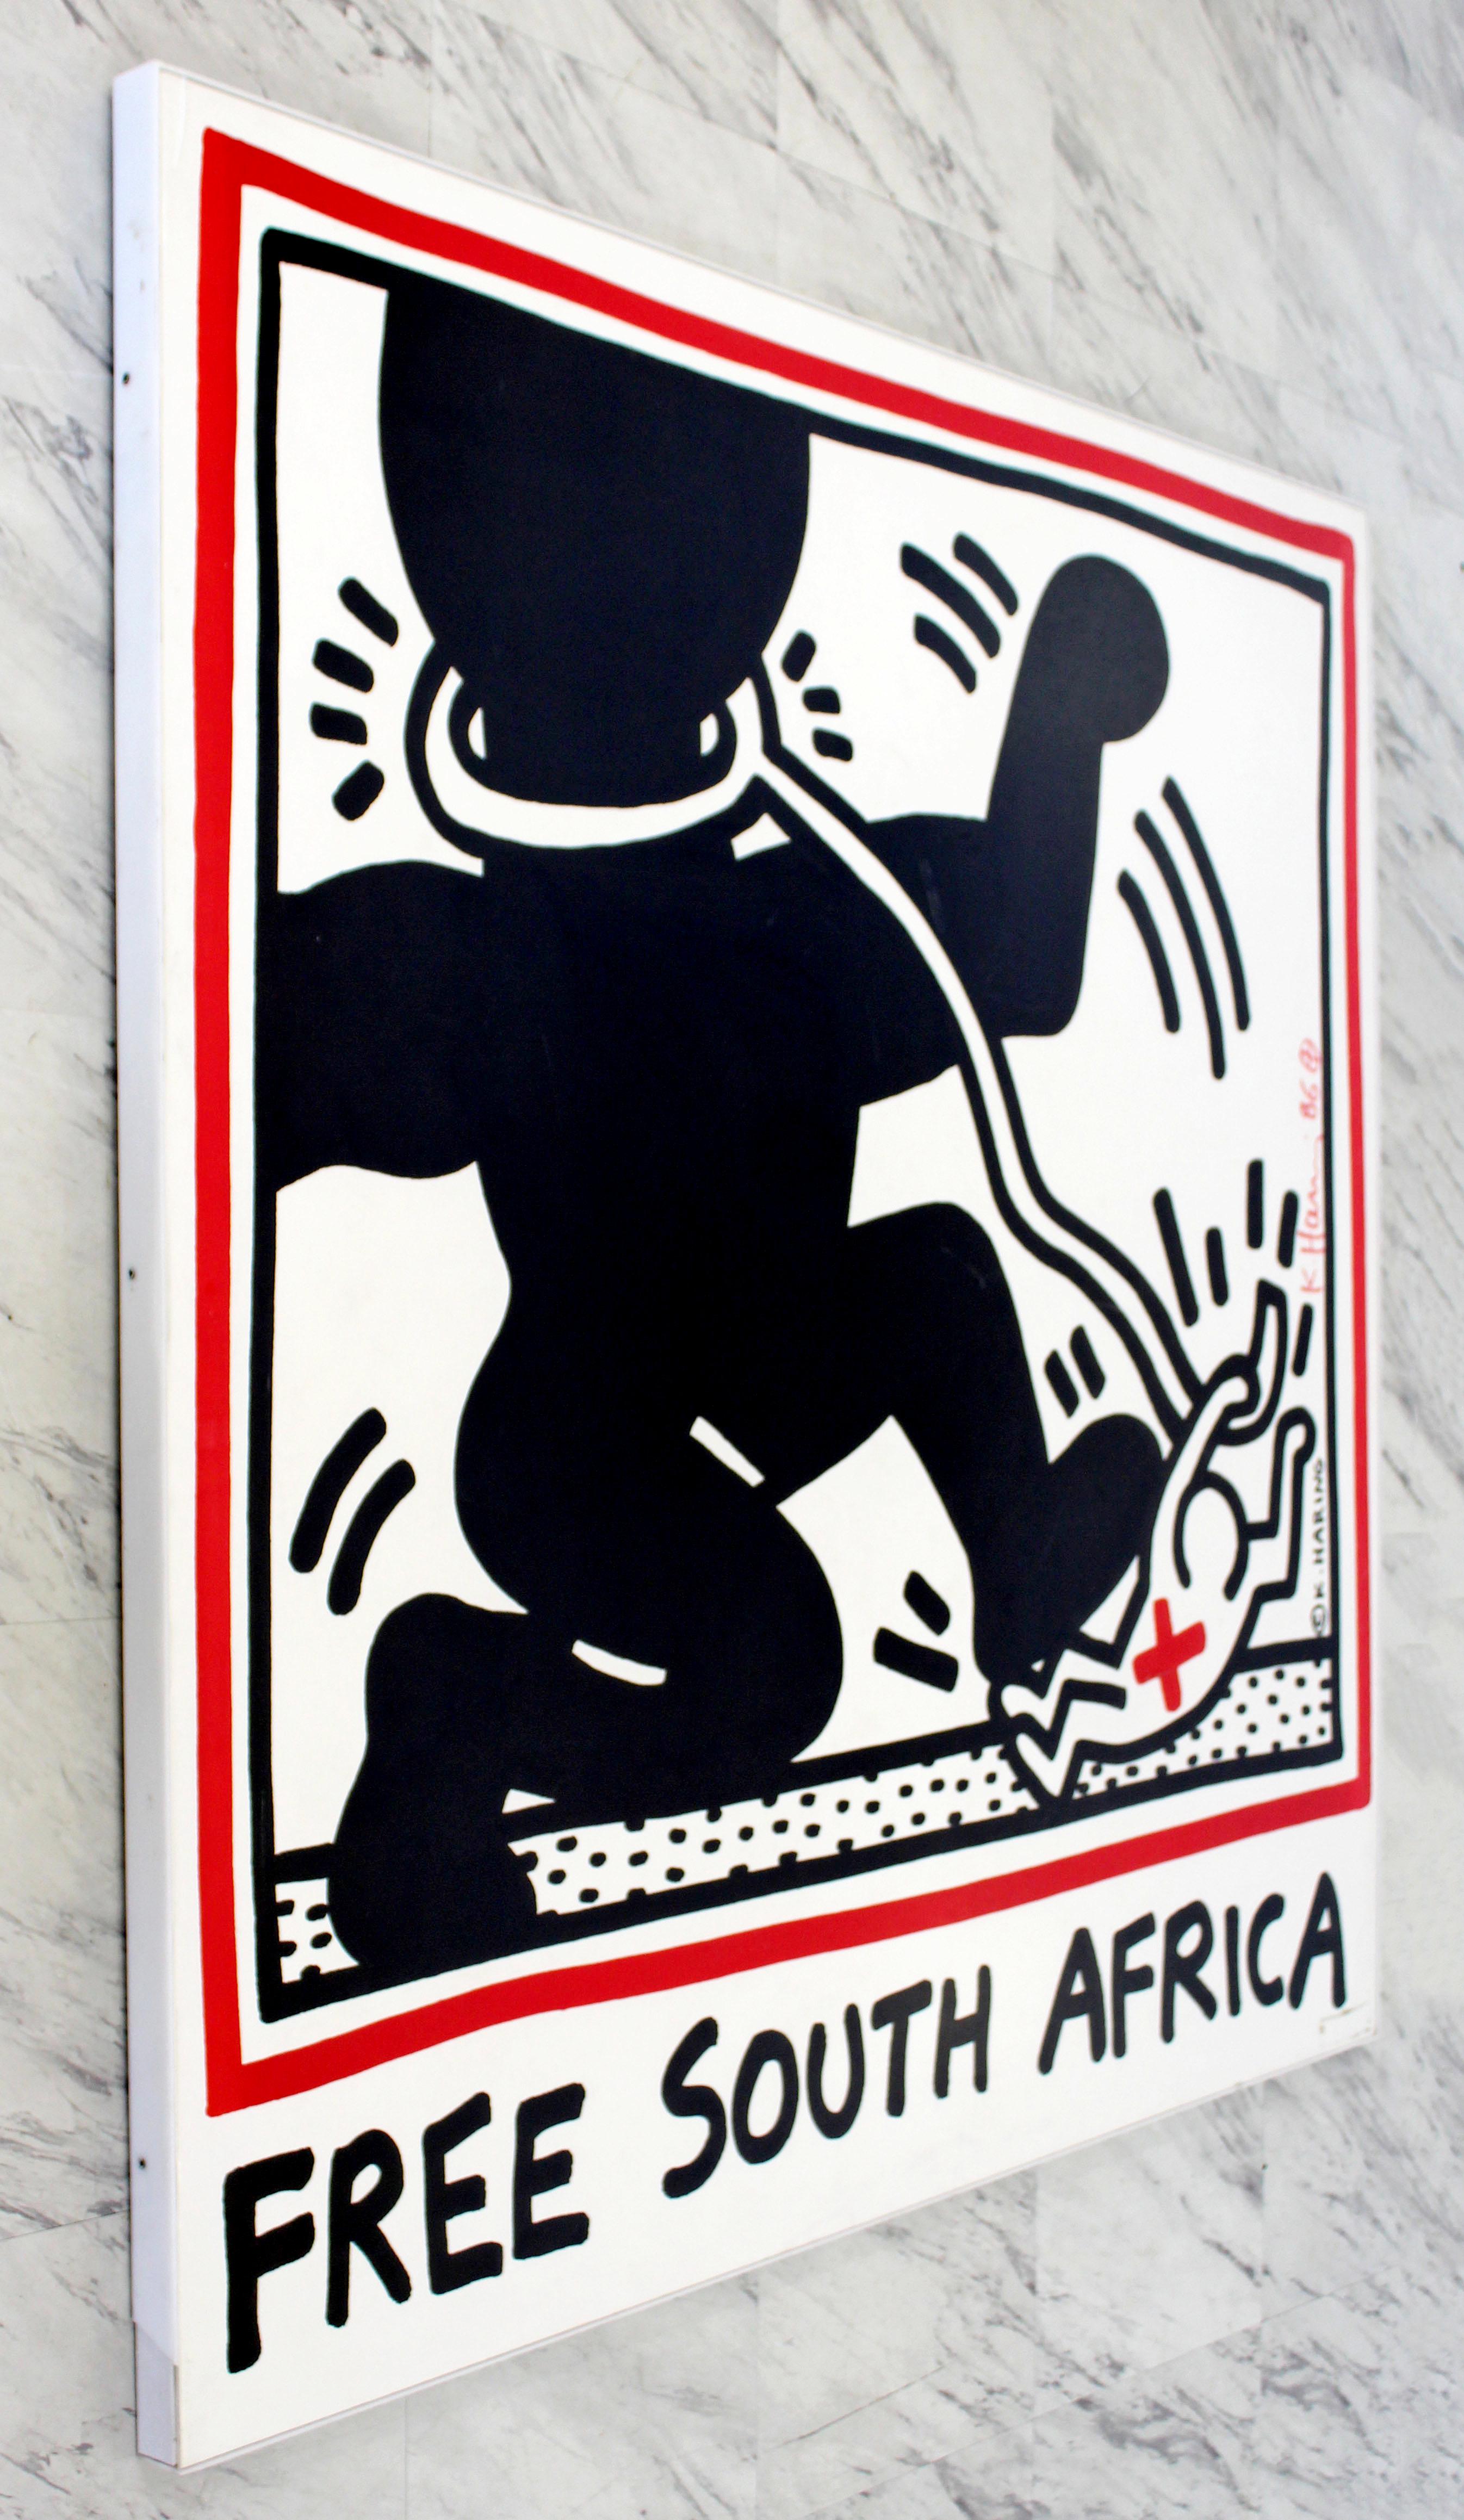 For your consideration is a phenomenal, Lucite framed, Free South Africa Limited Edition by Keith Haring, signed and dated 1986. Artwork is in excellent condition, but the frame is in fair condition. The dimensions are 48